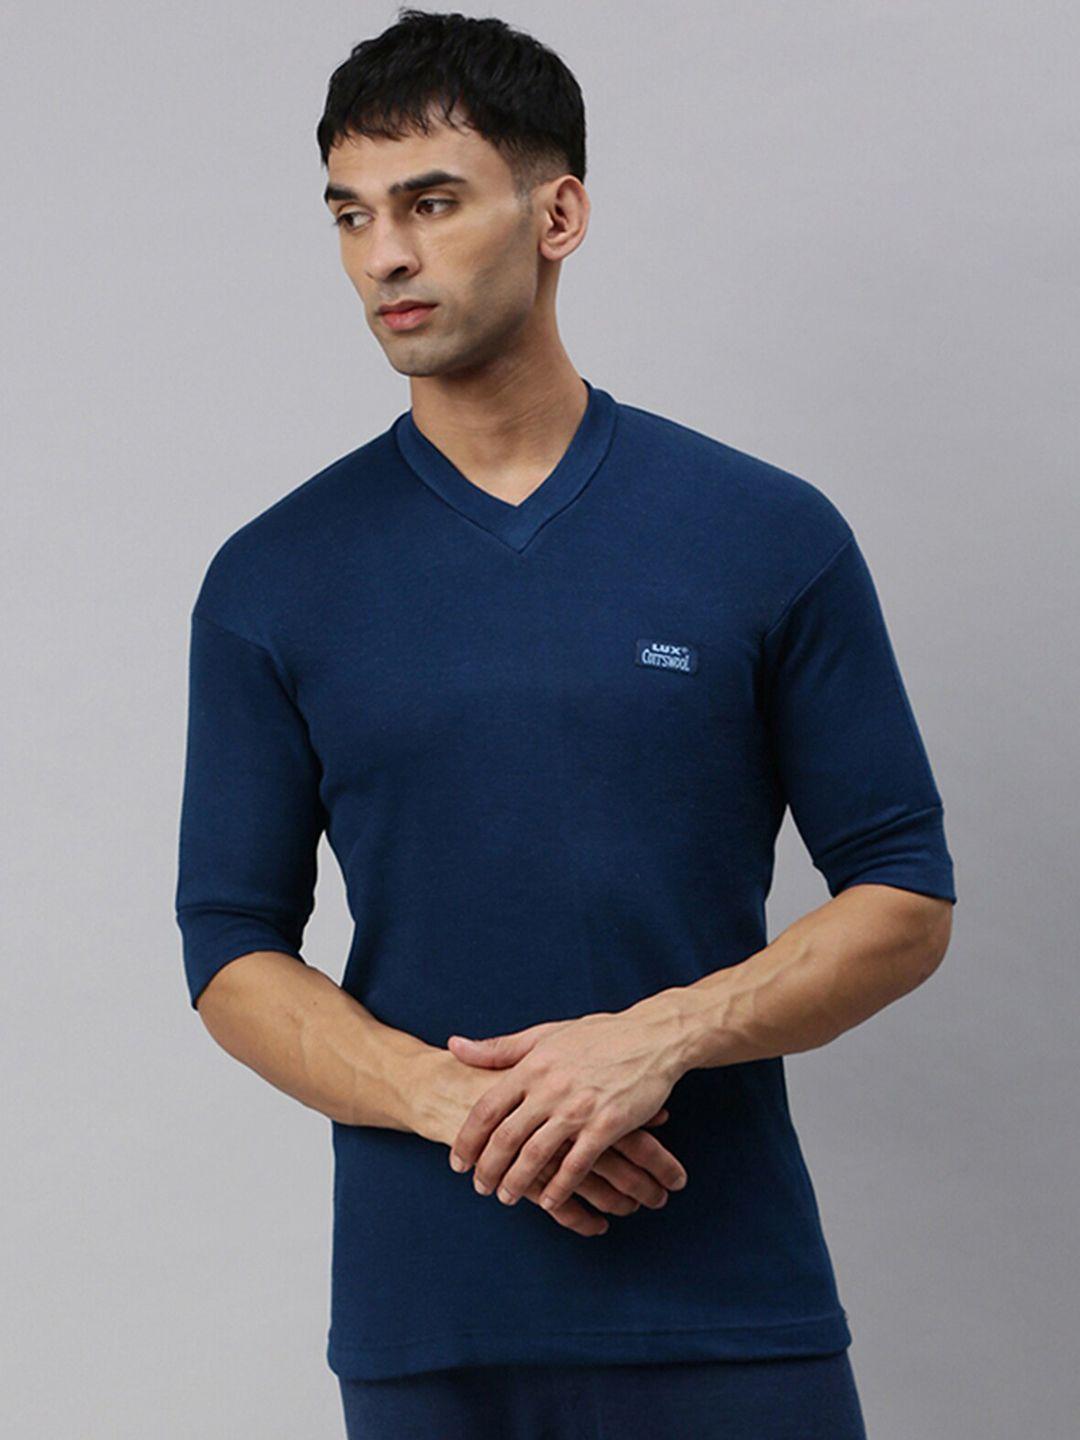 lux cottswool v-neck wool thermal tops